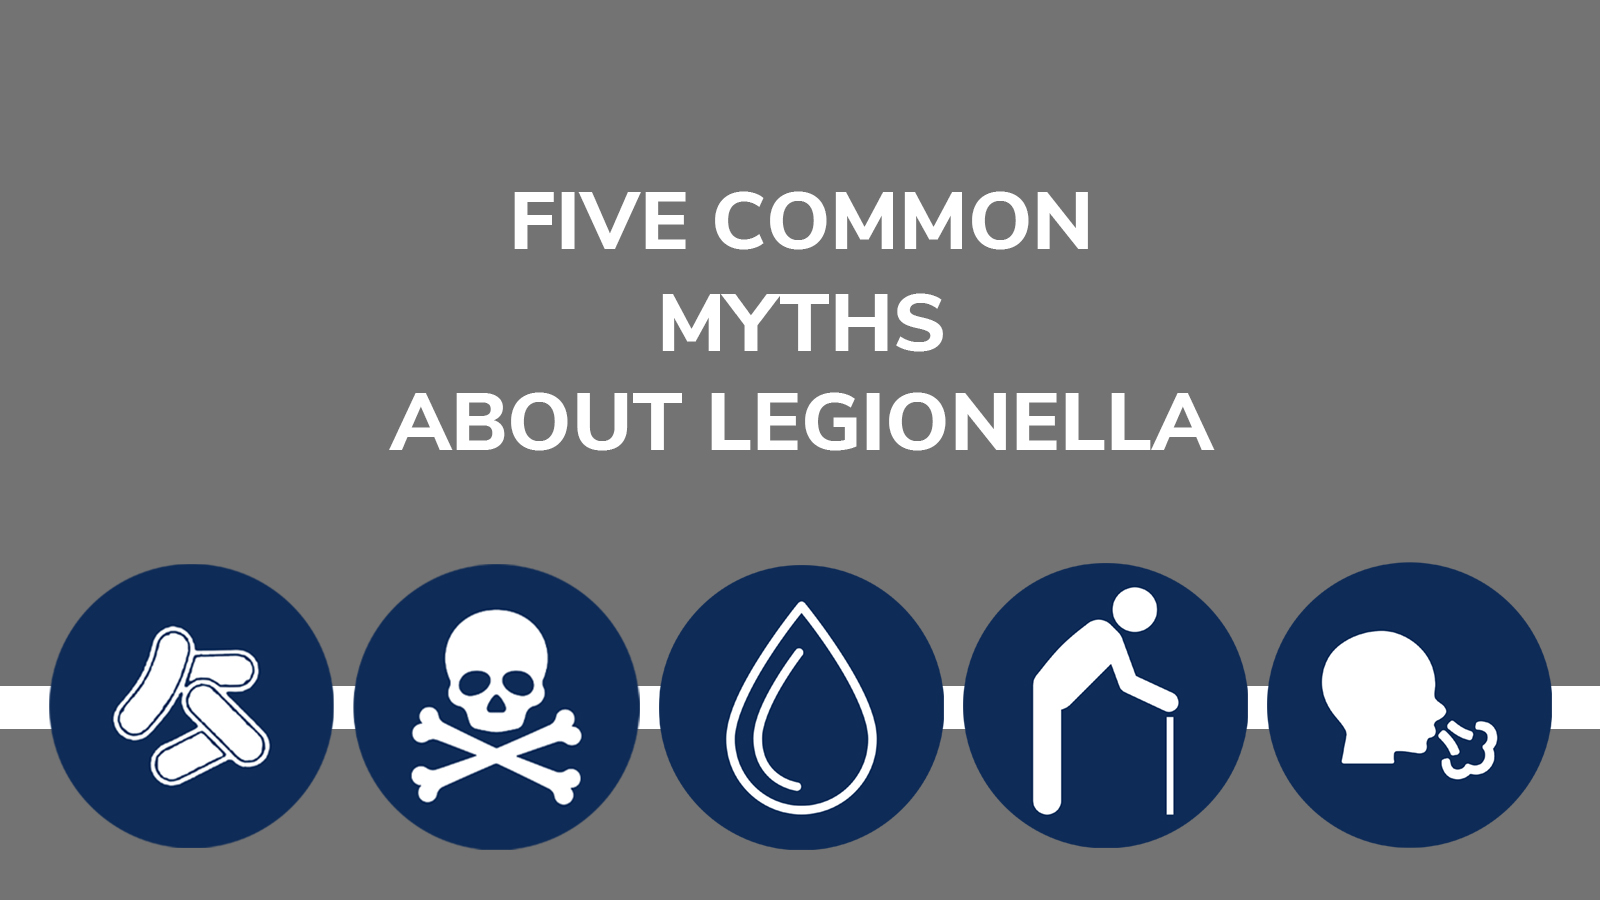 Five Common myths about Legionella